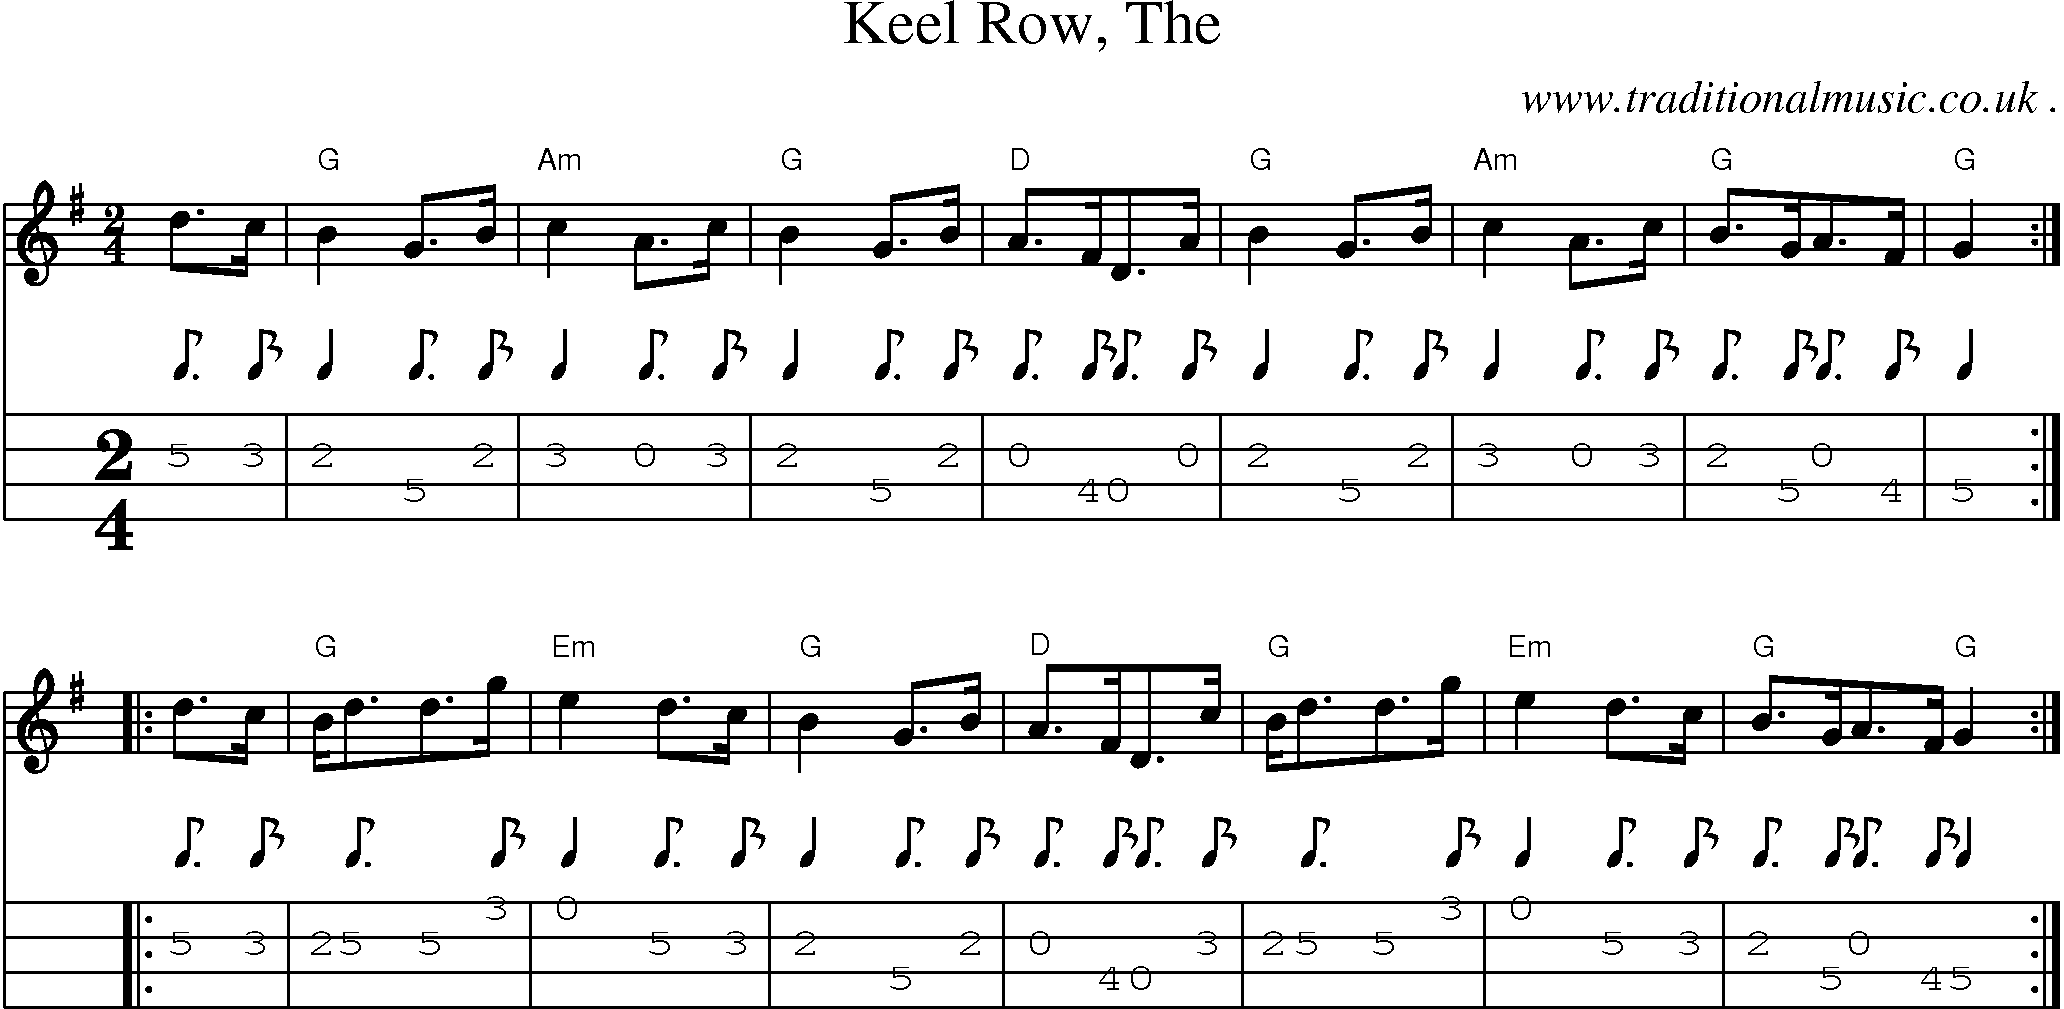 Music Score and Guitar Tabs for Keel Row The